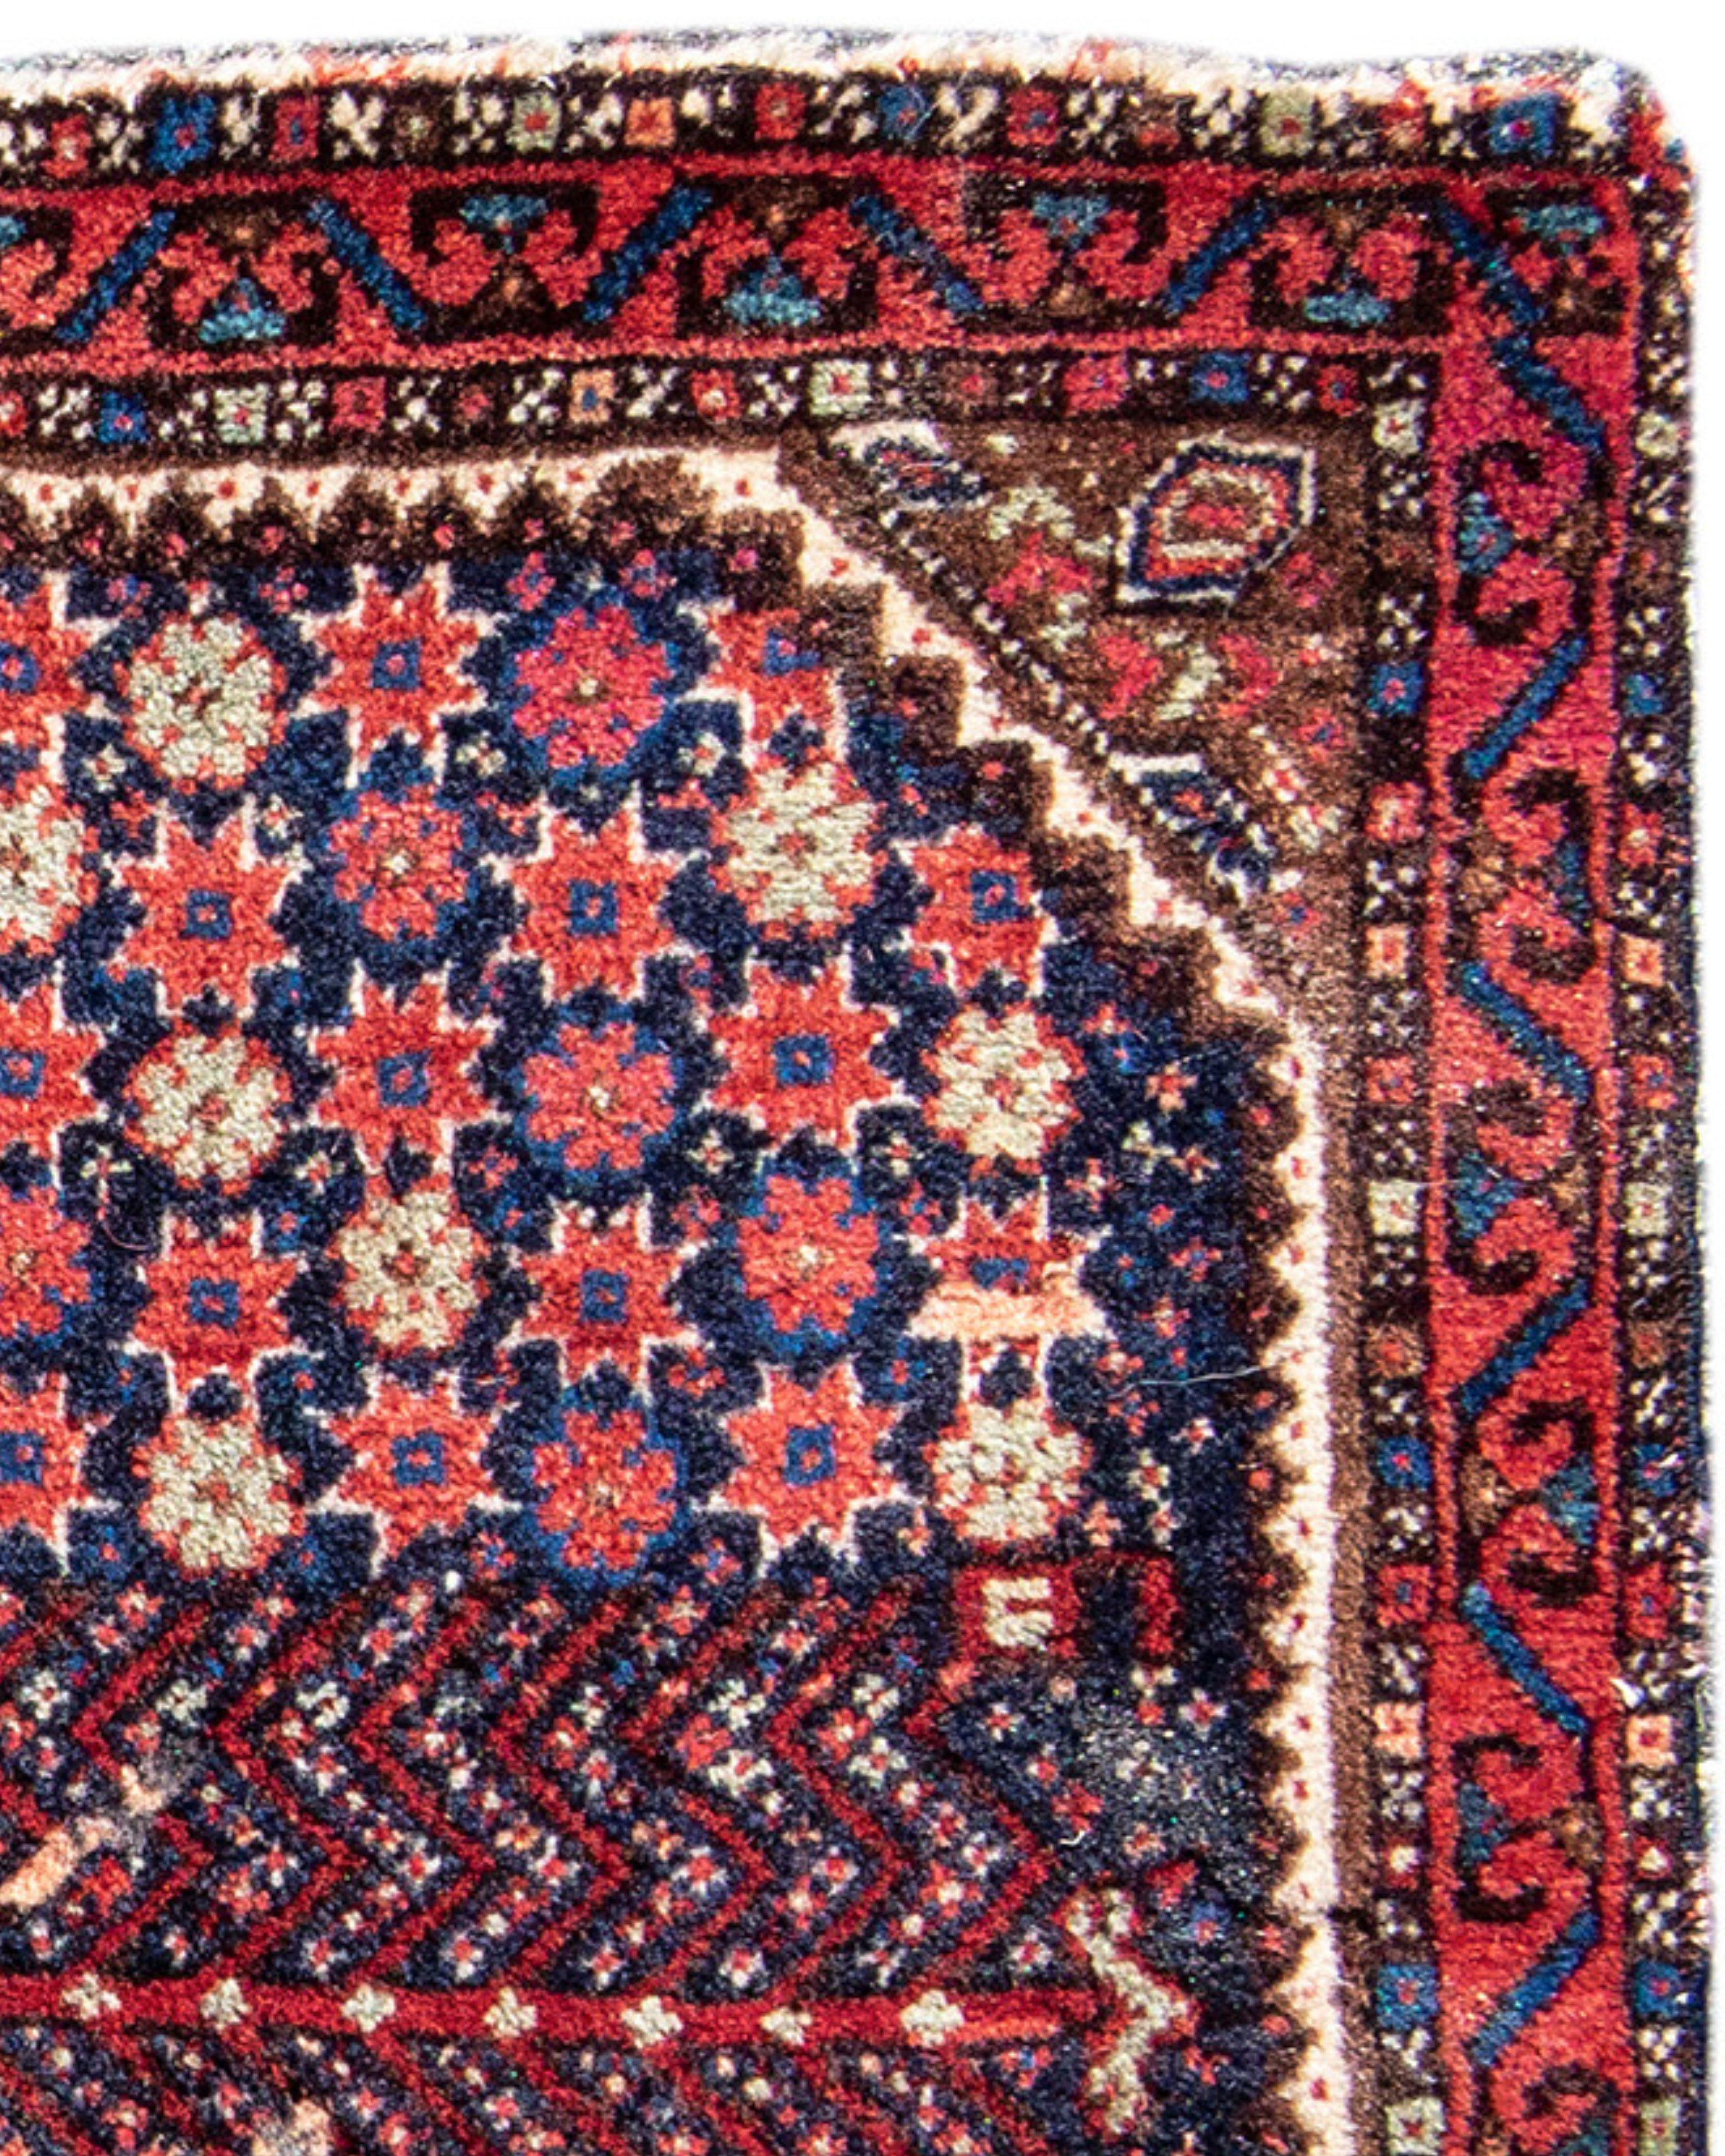 Antique Persian Afshar Bagface Bag, 19th Century

The design pool of pile rugs and bags from South Persia often conform to known groups of motifs, but the patterns seen here do not. Akin to one example in the Rothberg collection (plate 126),